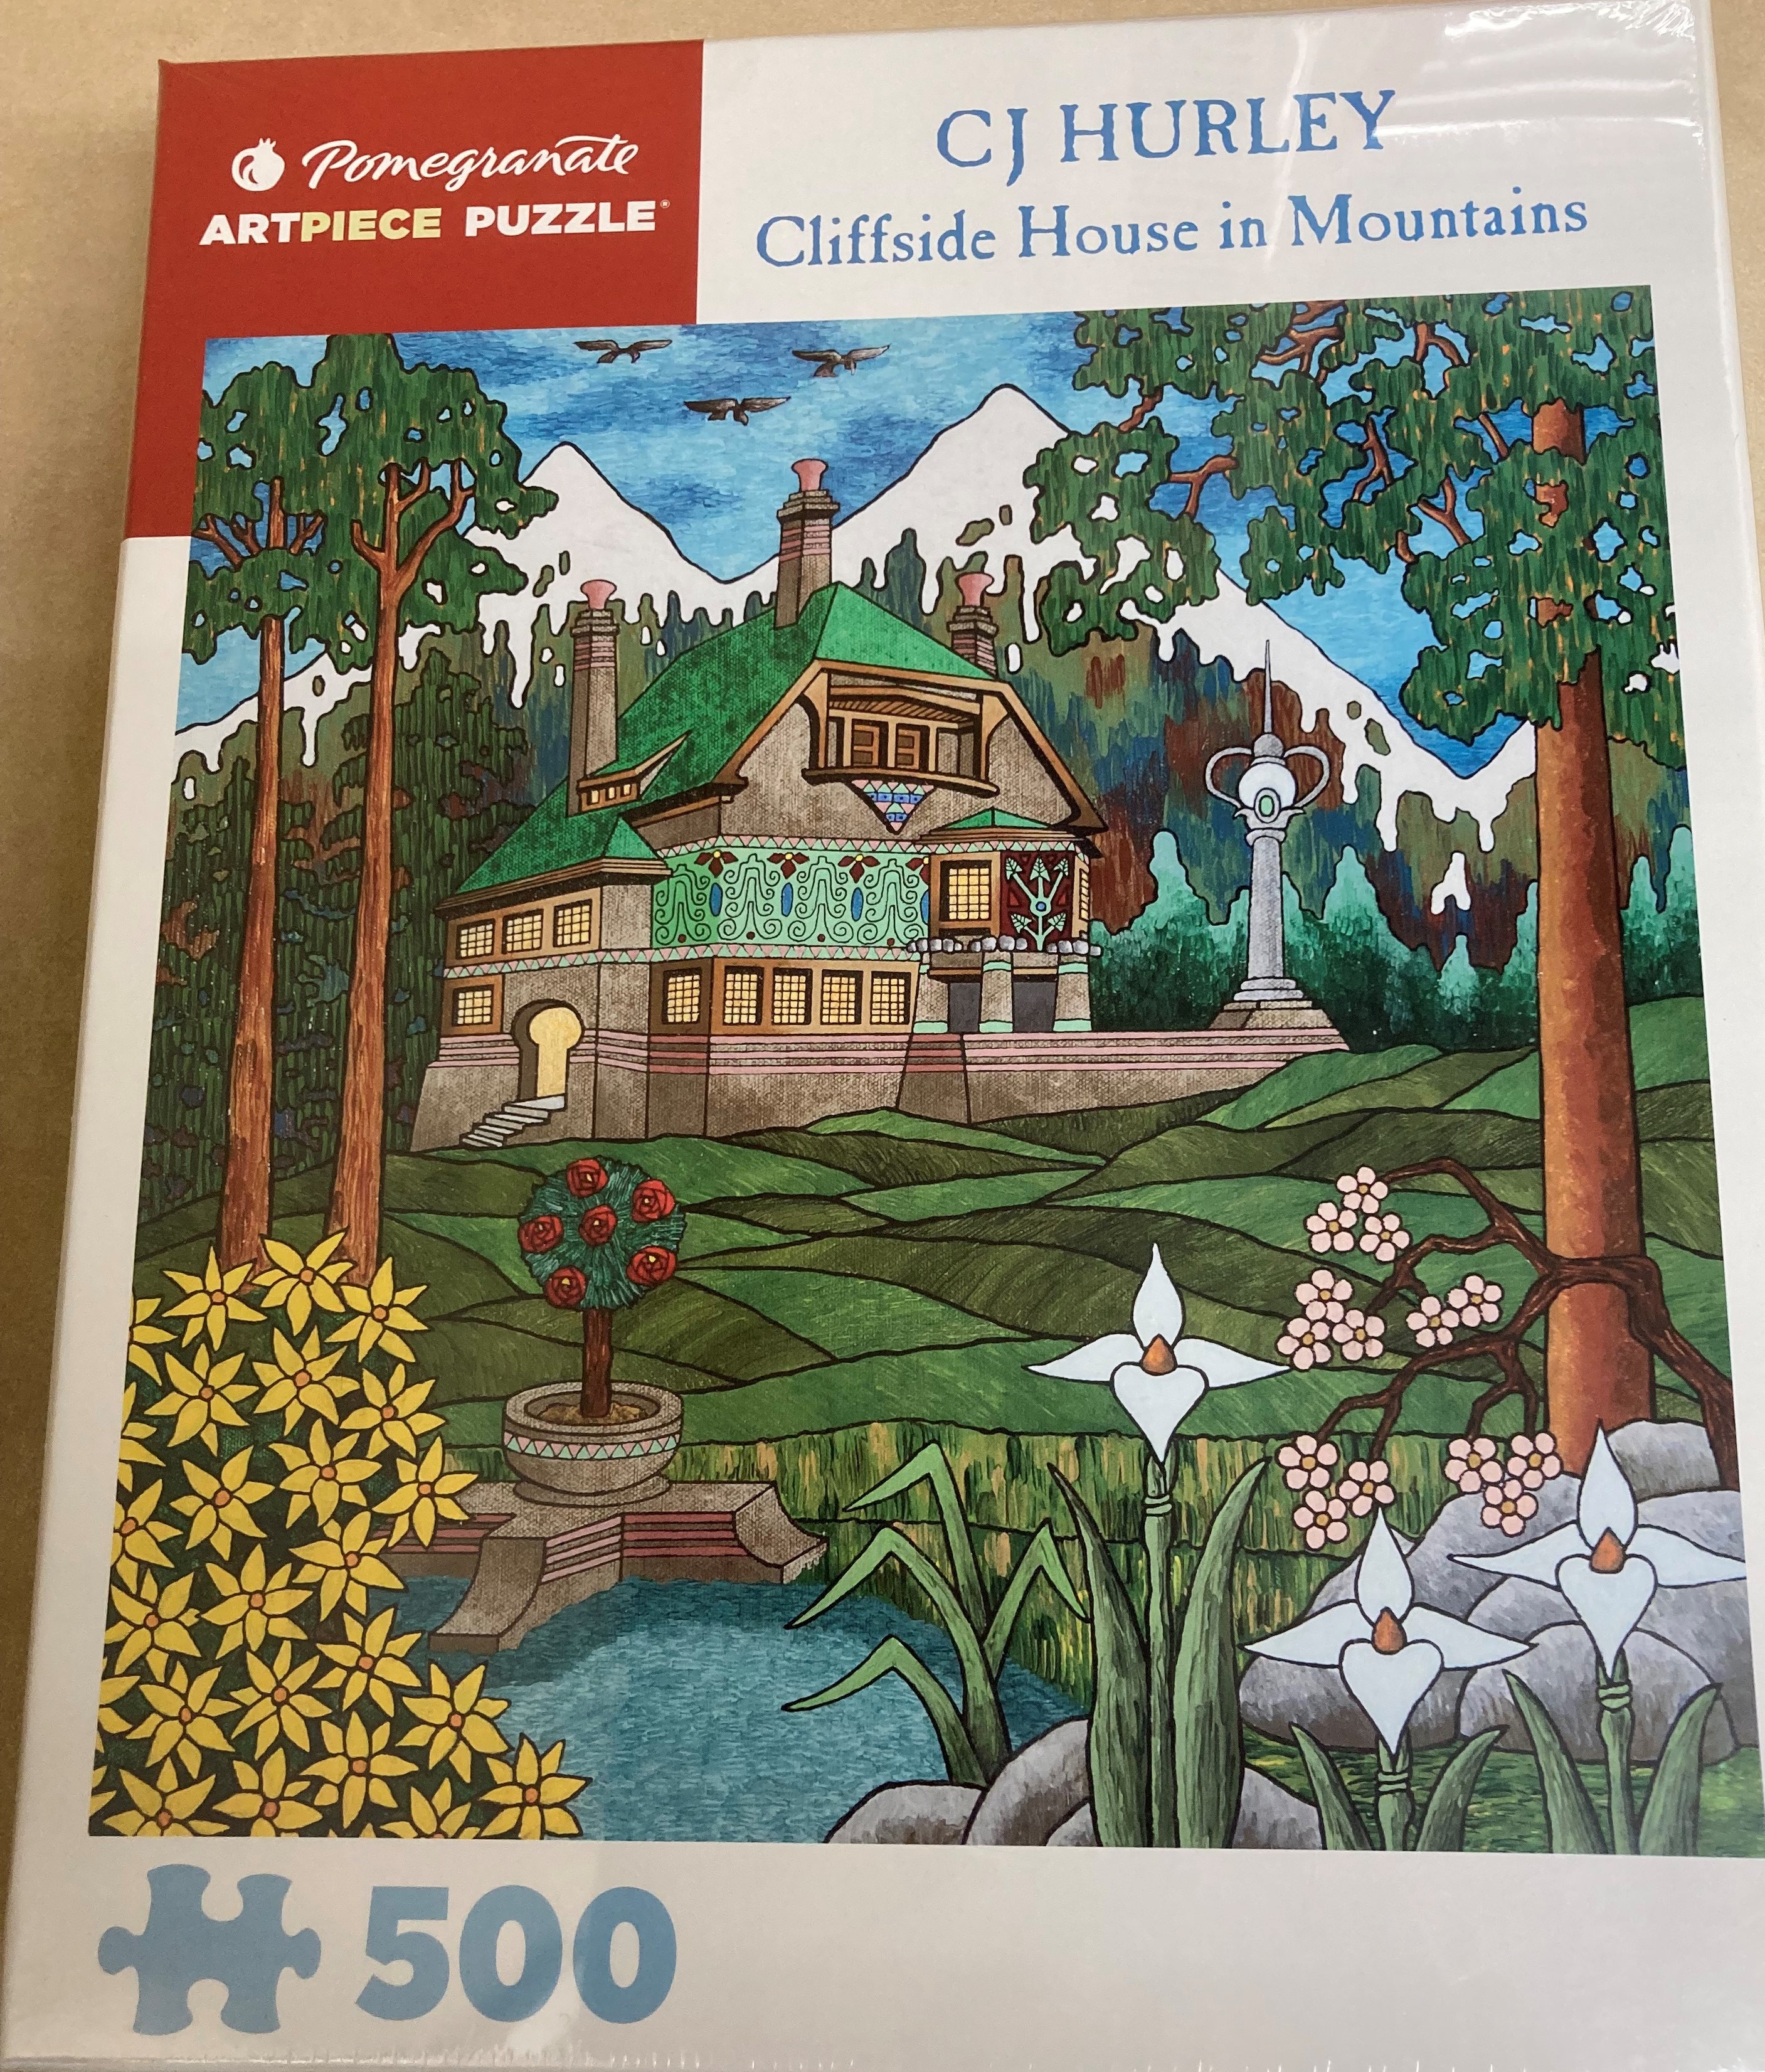 Puzzle for this program: CJ Hurley Cliffside House in Mountains